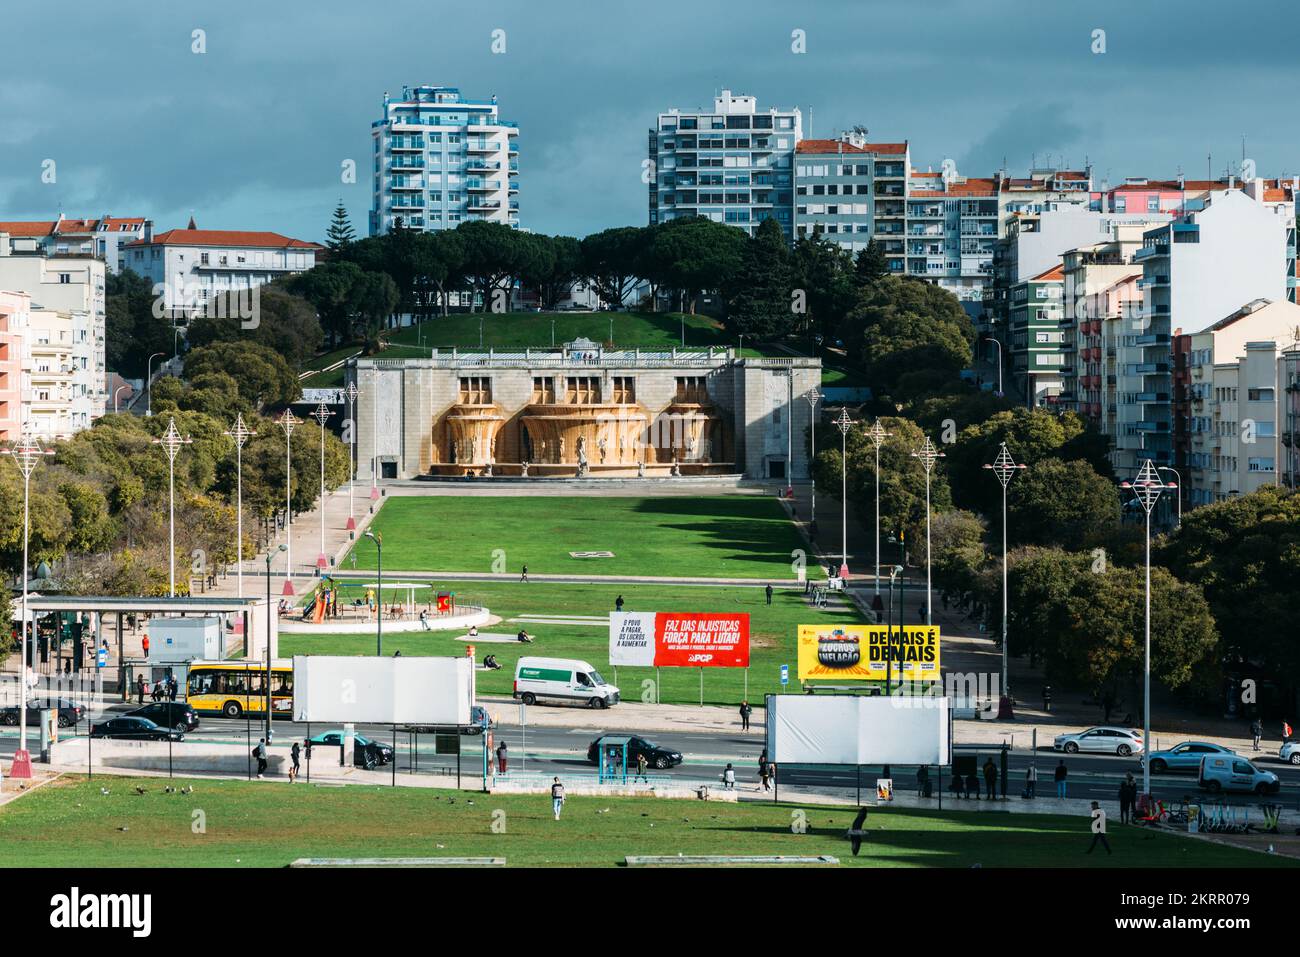 Large grass field at Alameda in Lisbon, Portugal with residential buildings Stock Photo